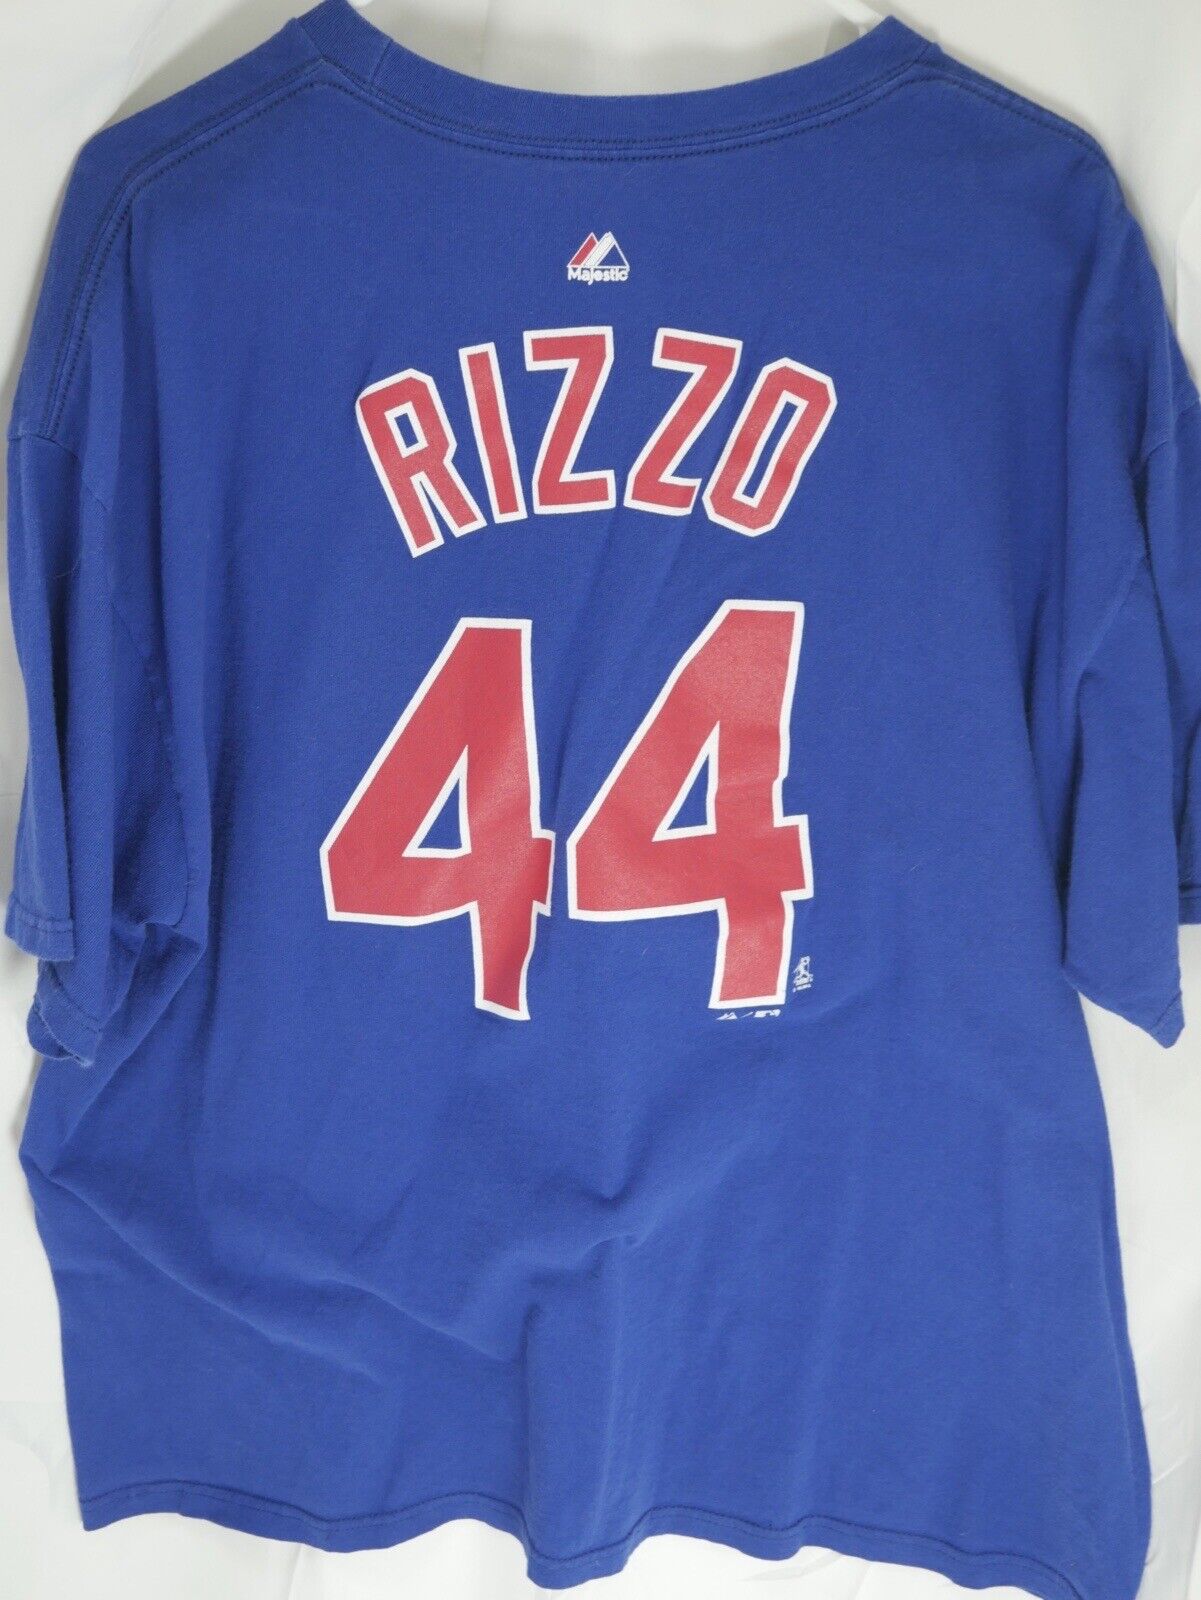 Anthony Rizzo #44 Chicago Cubs Royal PRINT BASEBALL JERSEY-3XL - Jerseys &  Cleats, Facebook Marketplace